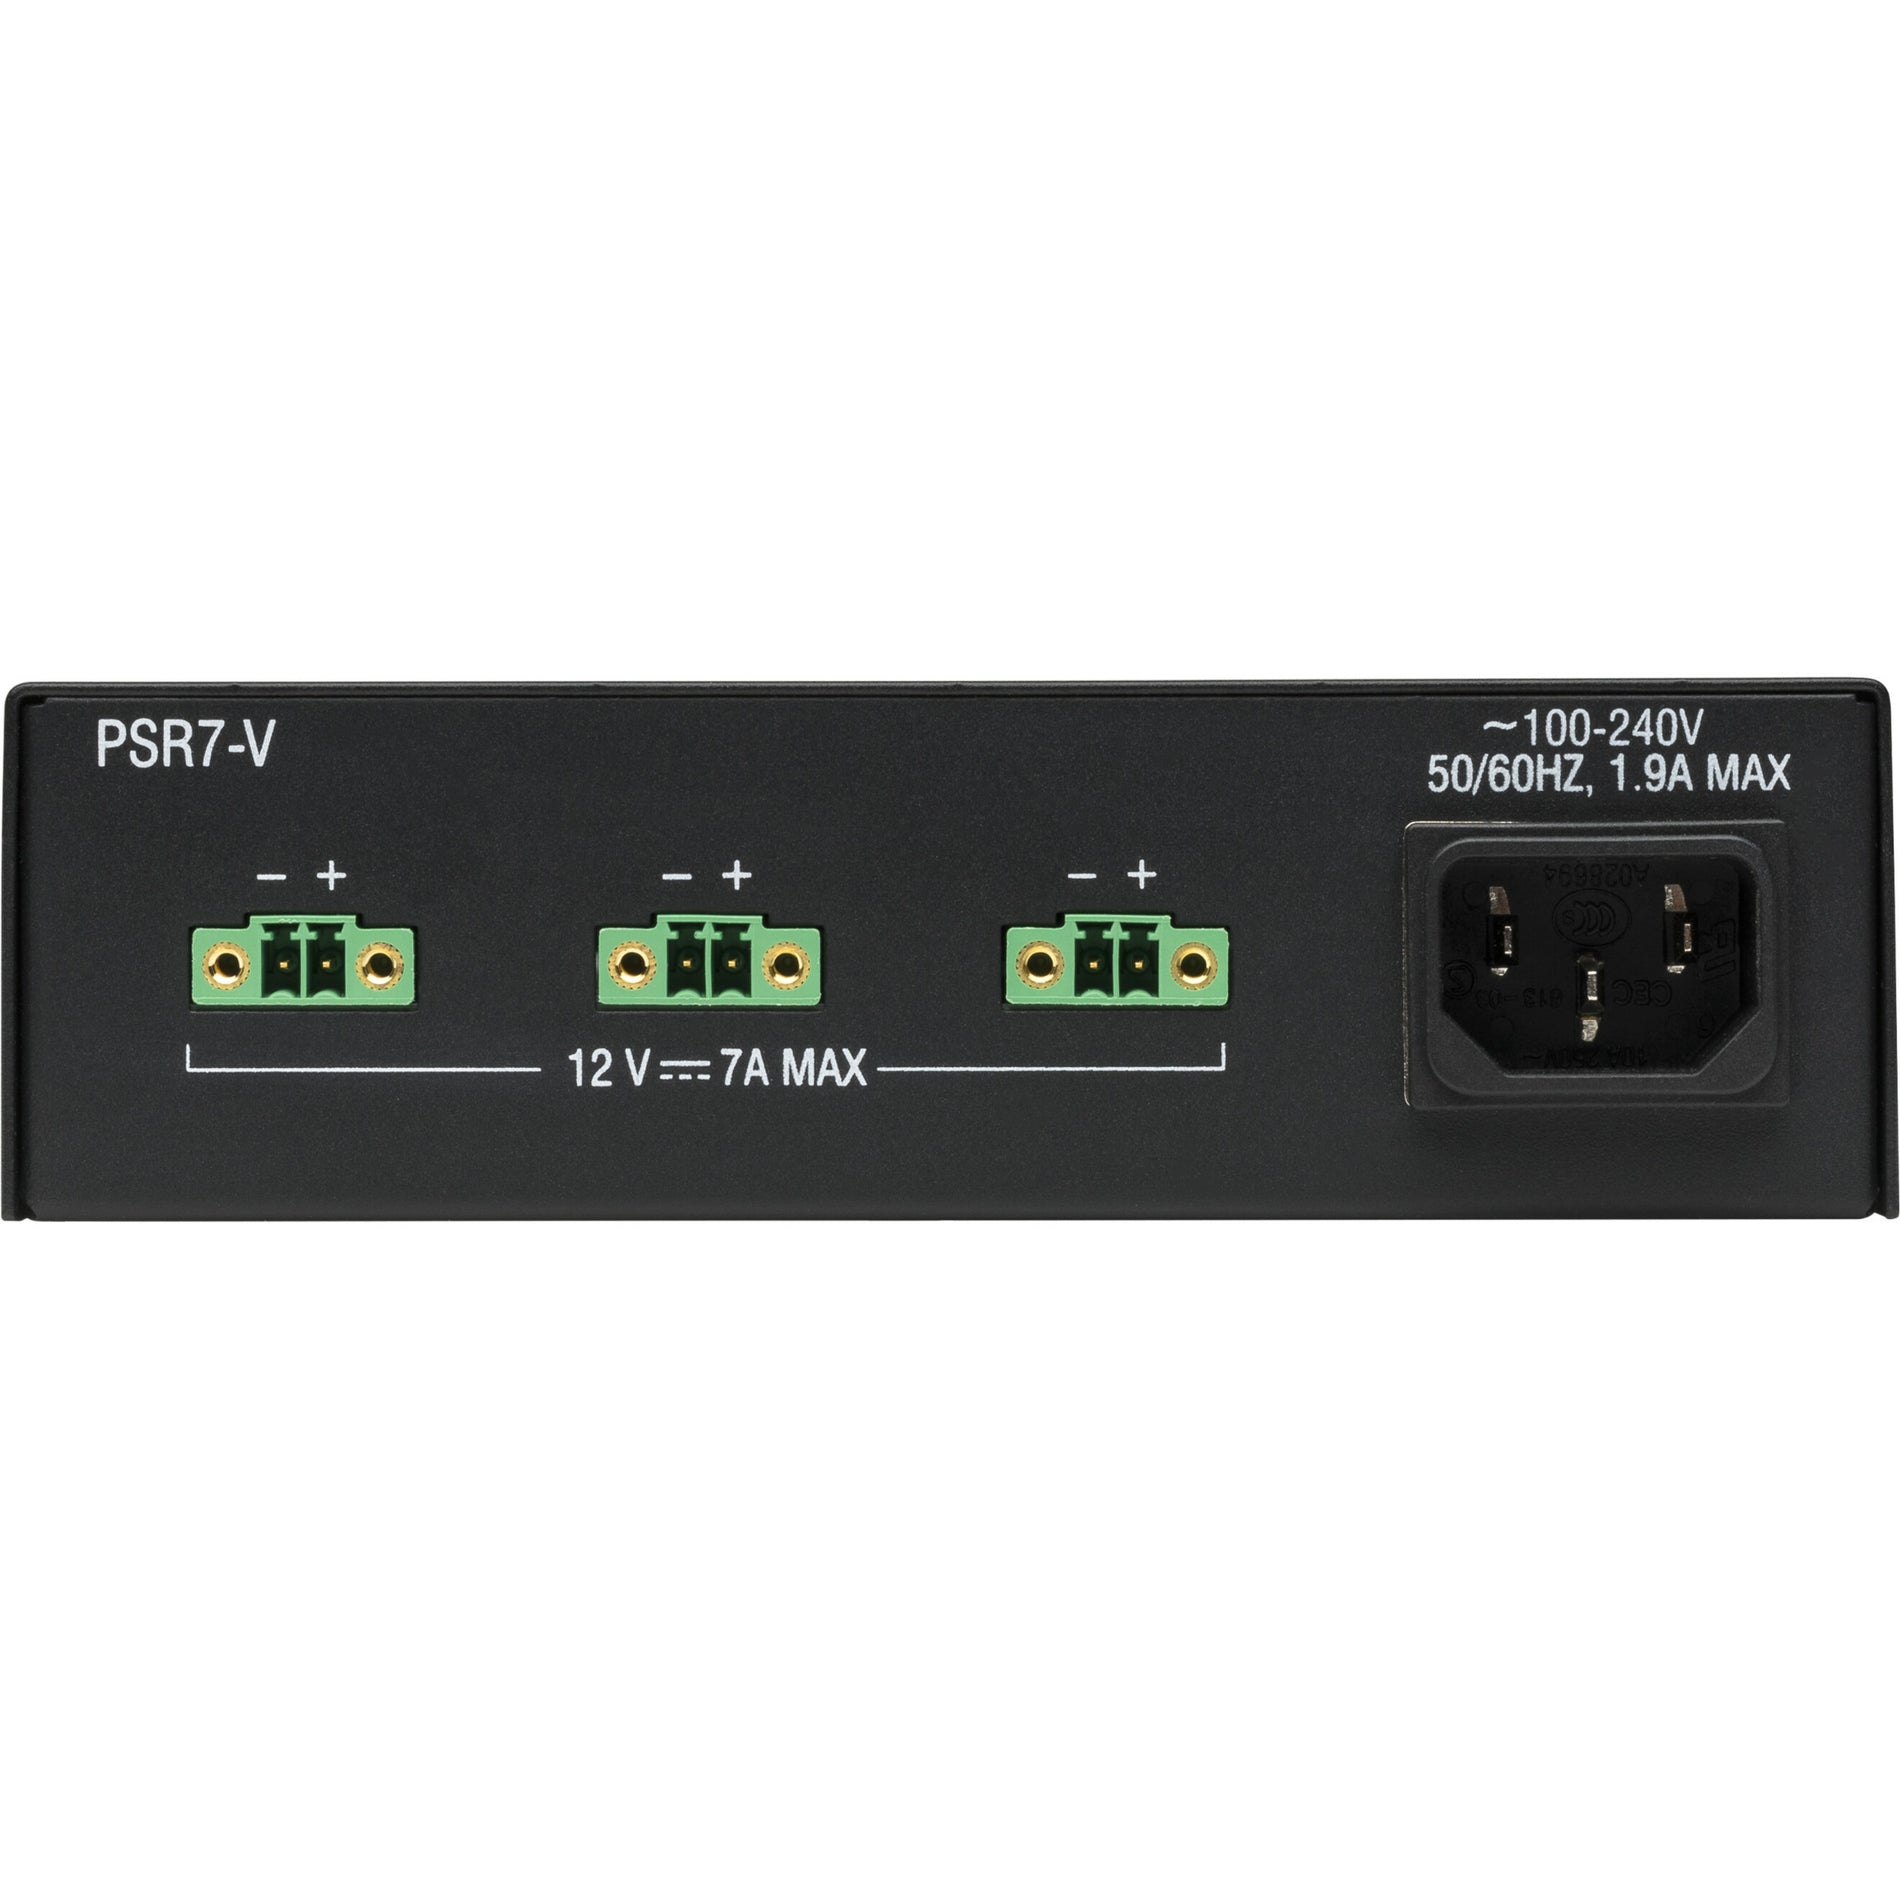 AMX FG423-49 PSR7-V Versatile Mount 5.5 Amp Power Supply, Compact and Reliable Power Solution